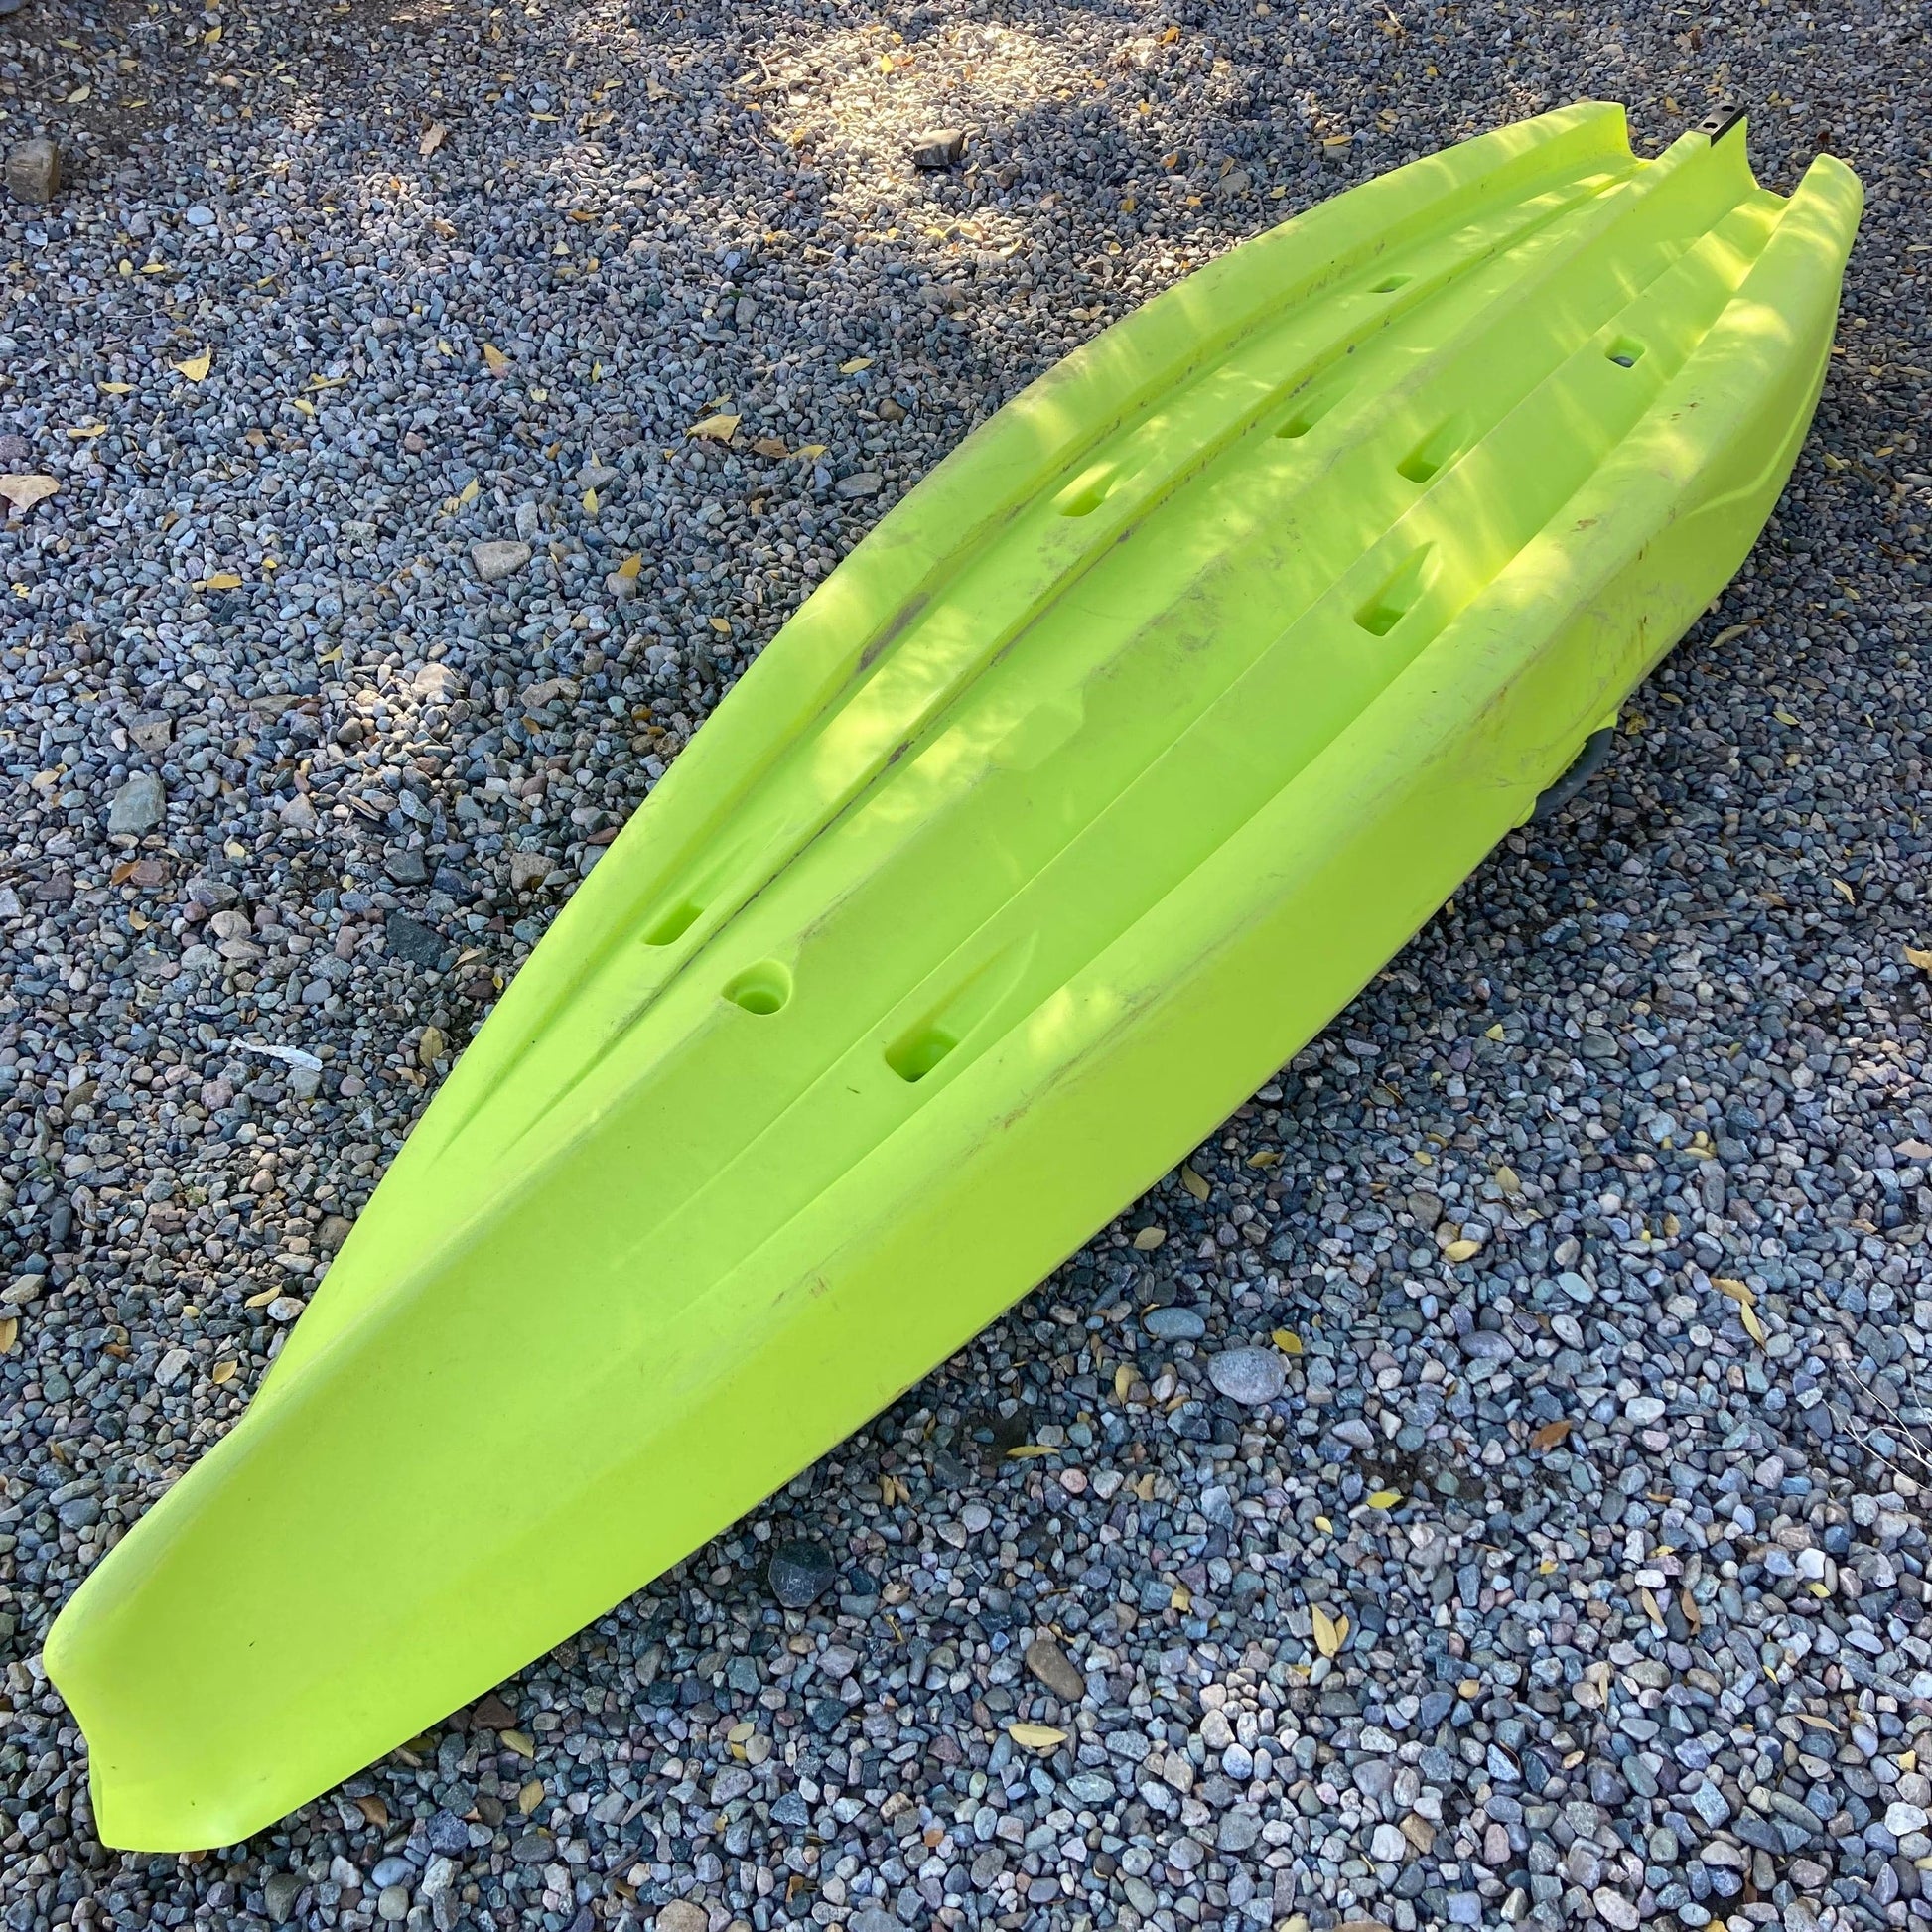 Featuring the Used Targa 10 used fishing kayak, used touring / rec kayak manufactured by Wilderness Systems shown here from a second angle.